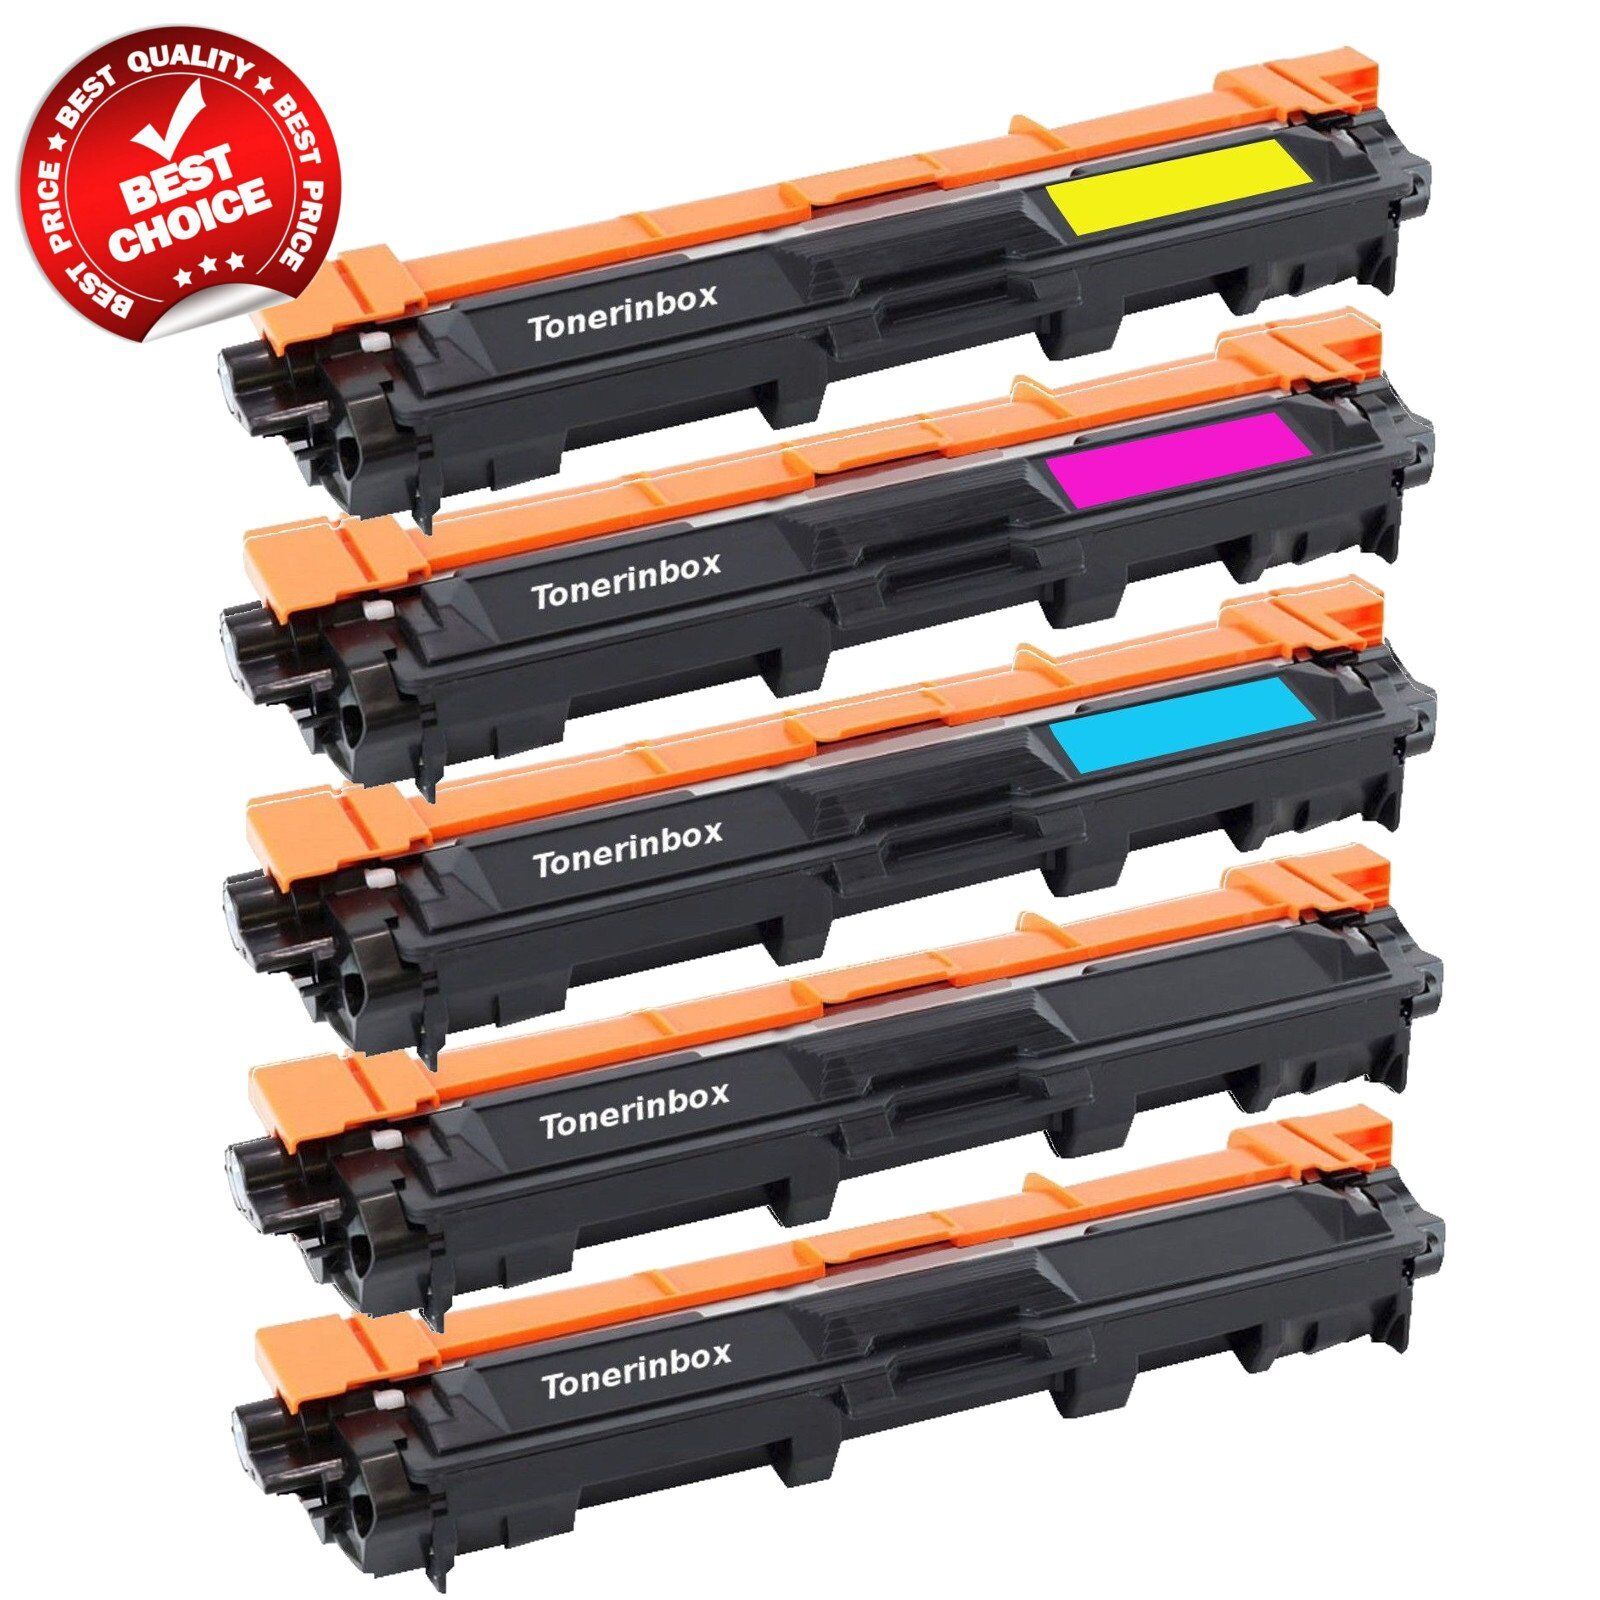 5 Pk TN221 BK TN225 Color Toner For Brother MFC-9130CW, MFC-9330CDW, MFC-9340CDW